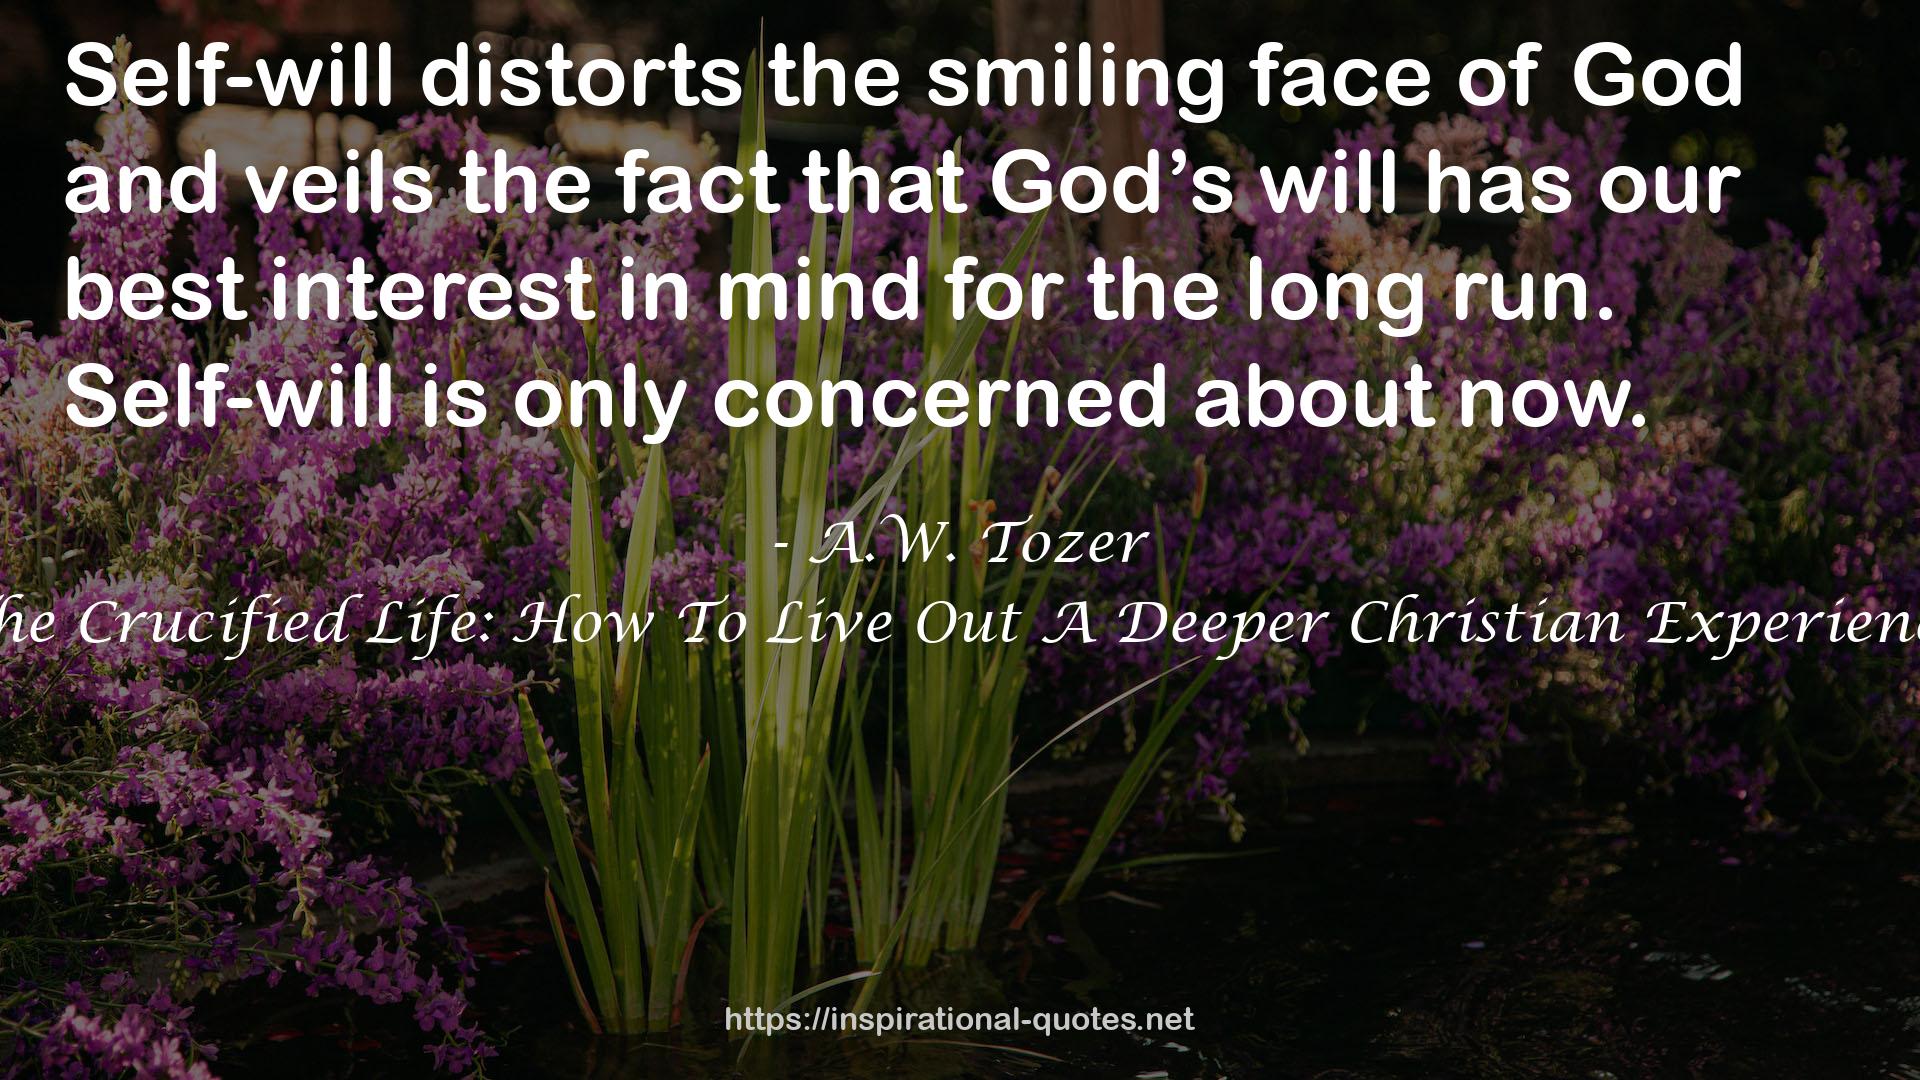 The Crucified Life: How To Live Out A Deeper Christian Experience QUOTES